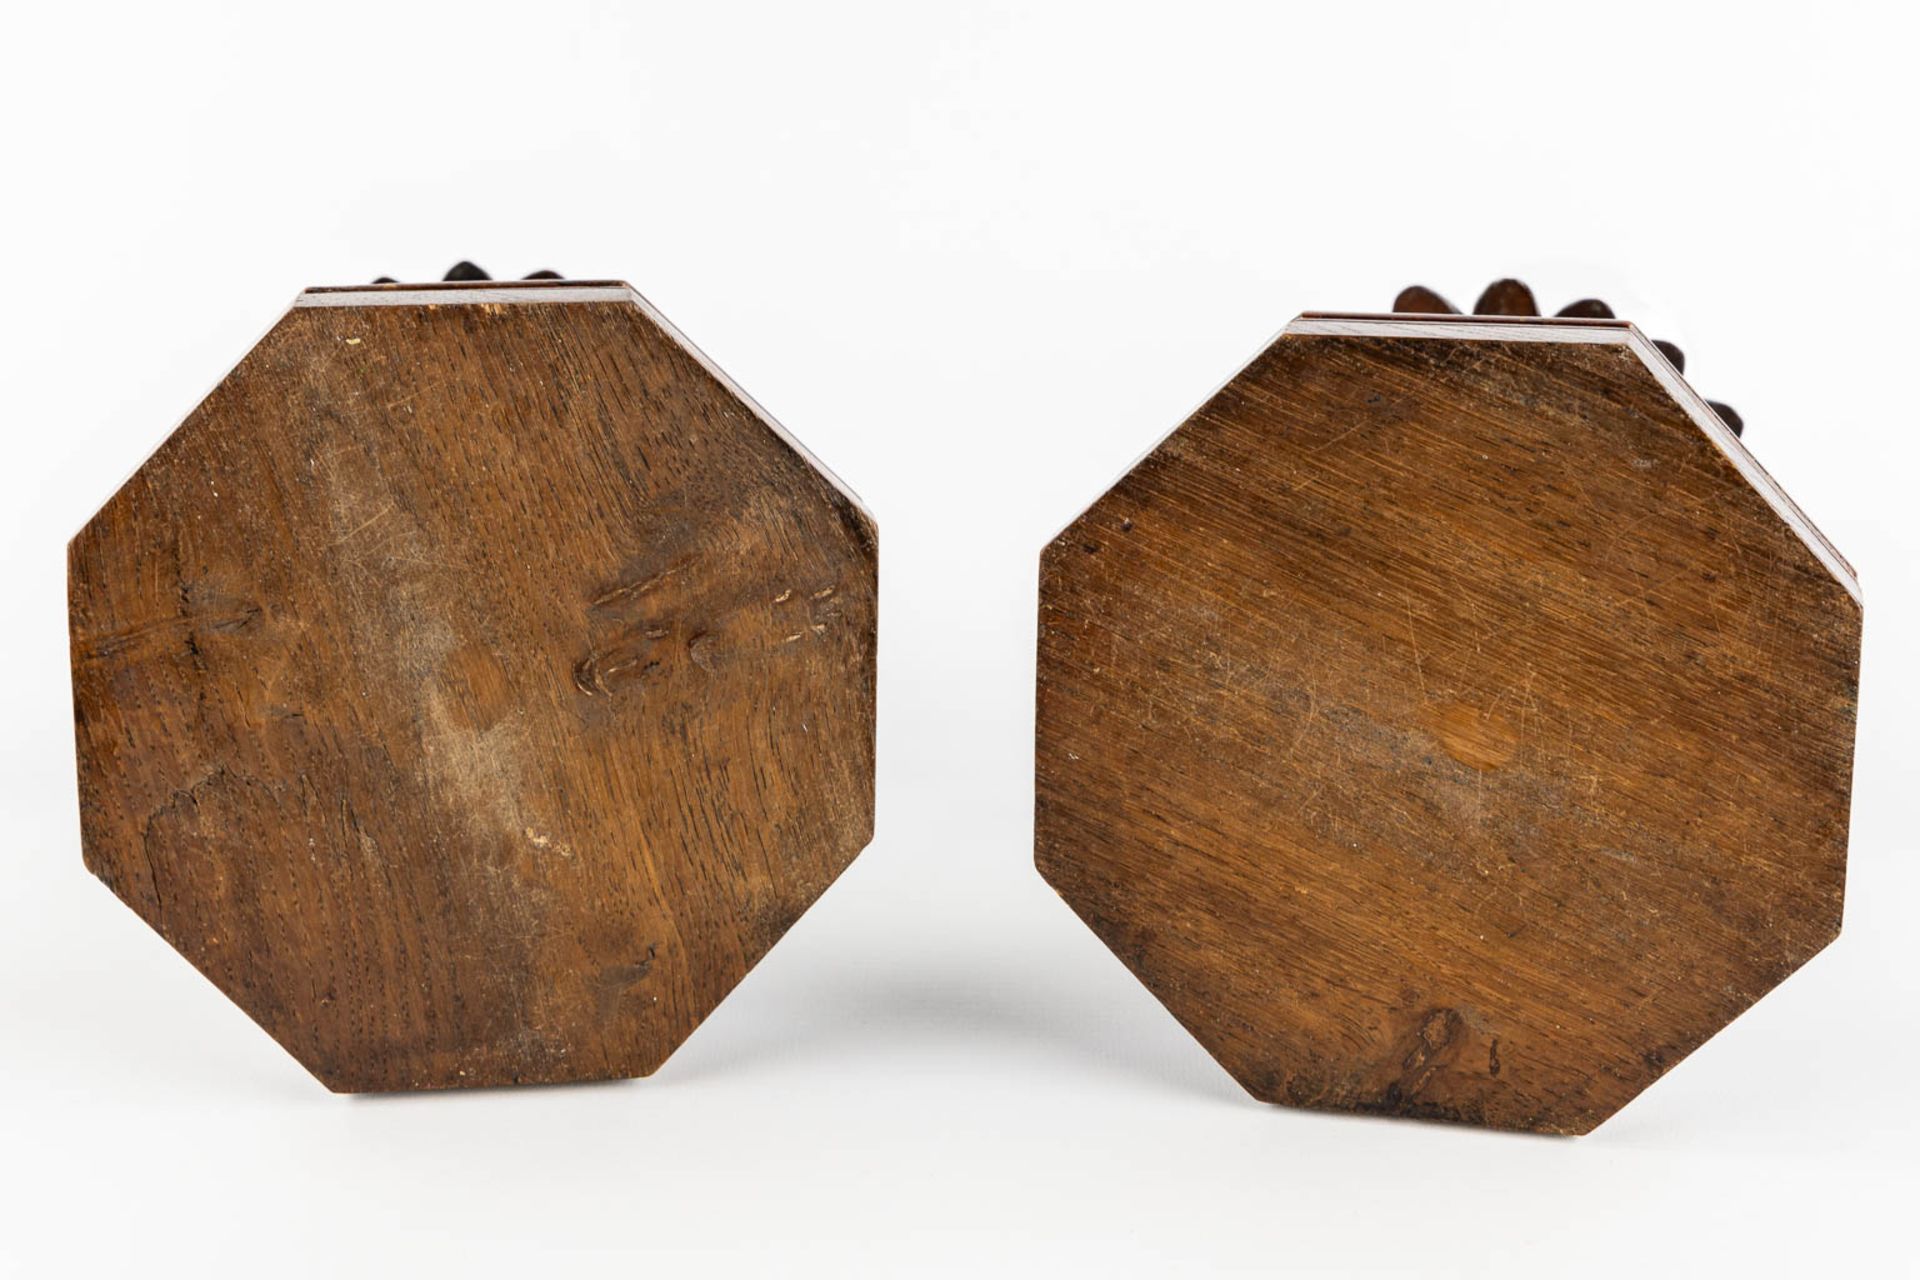 Two bases for Trumpet Vases, Schwartzwald or Black Forest. Circa 1880. (L:14,5 x W:14,5 x H:40 cm) - Image 7 of 11